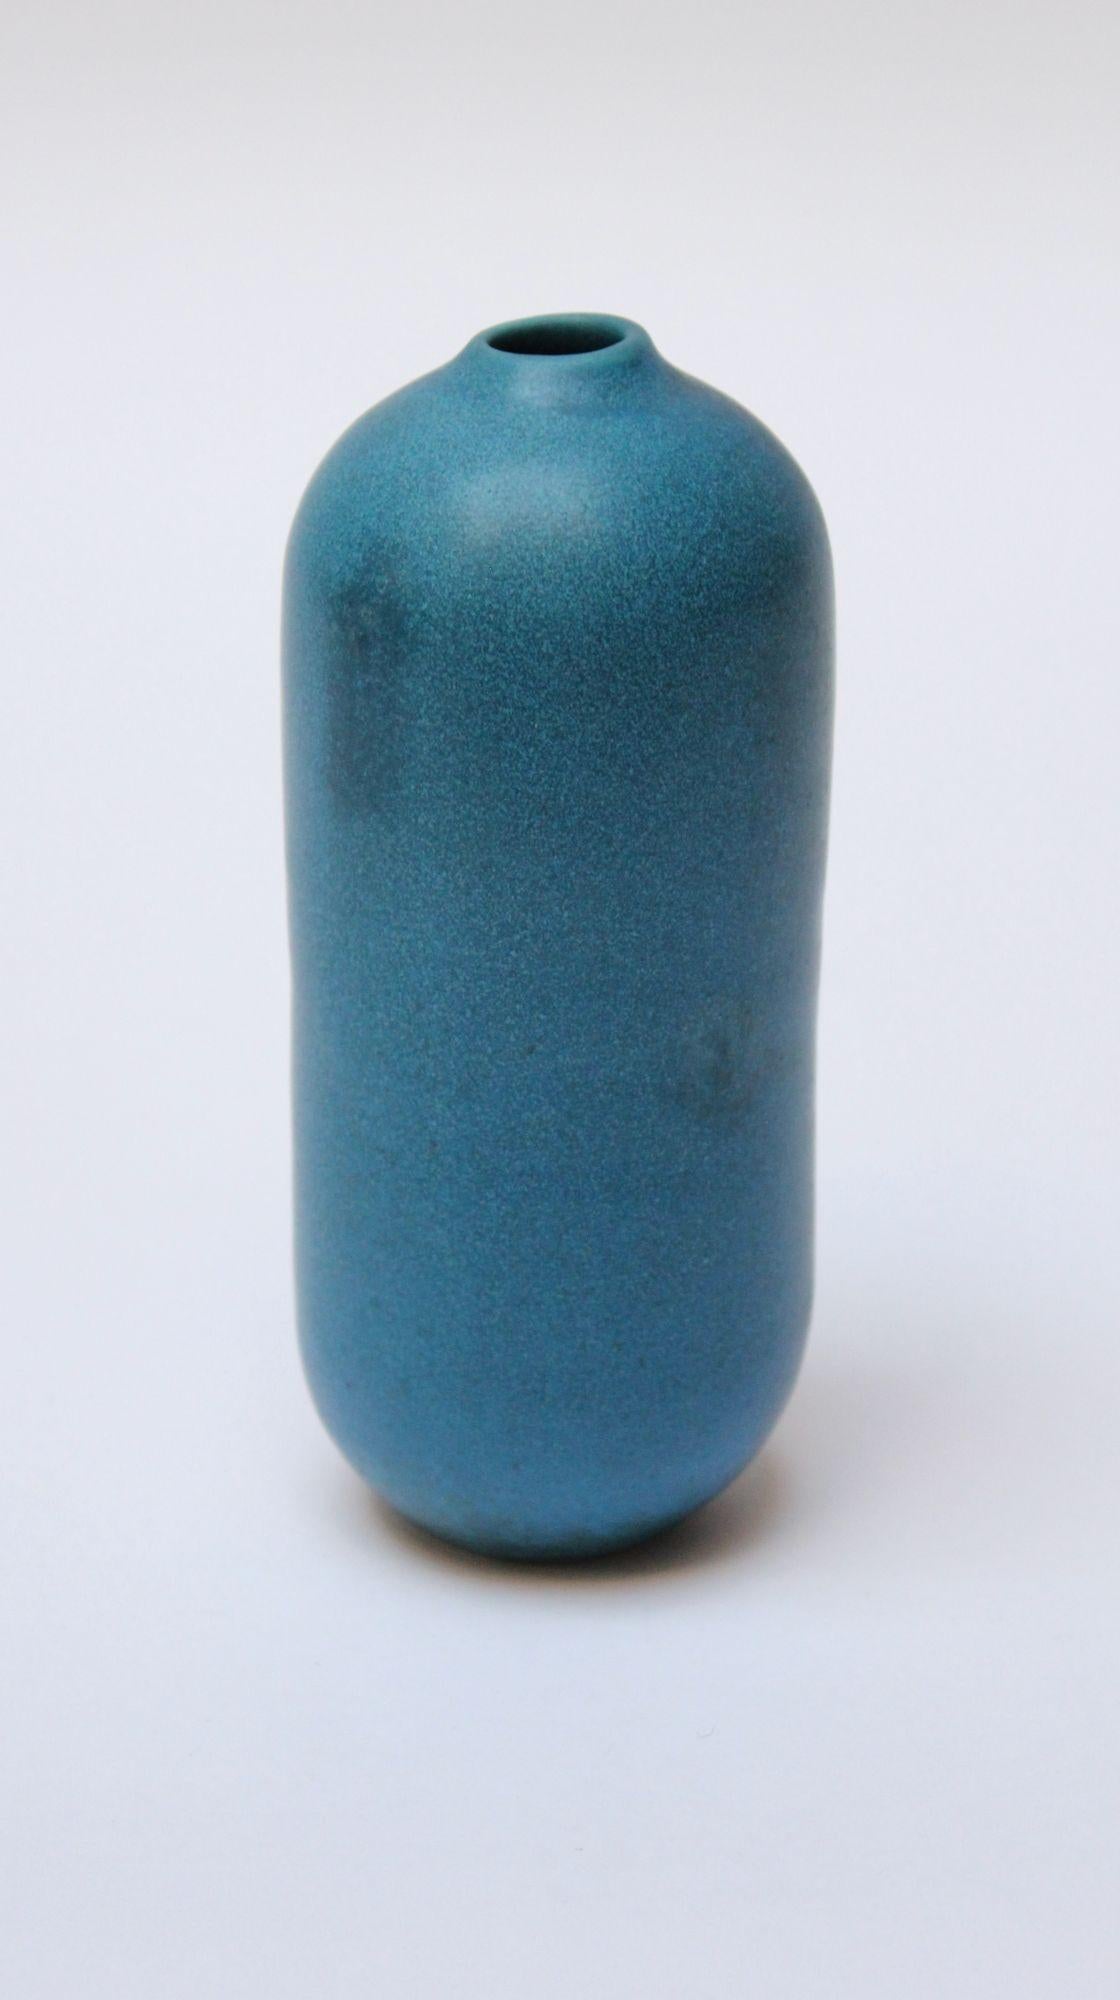 Matte-blue glaze stoneware bullet-form bud vase (ca. 1960s, Scandinavia). Smooth, modernist form with rich textures within the glaze, as shown. Diminutive size: H: 6.25